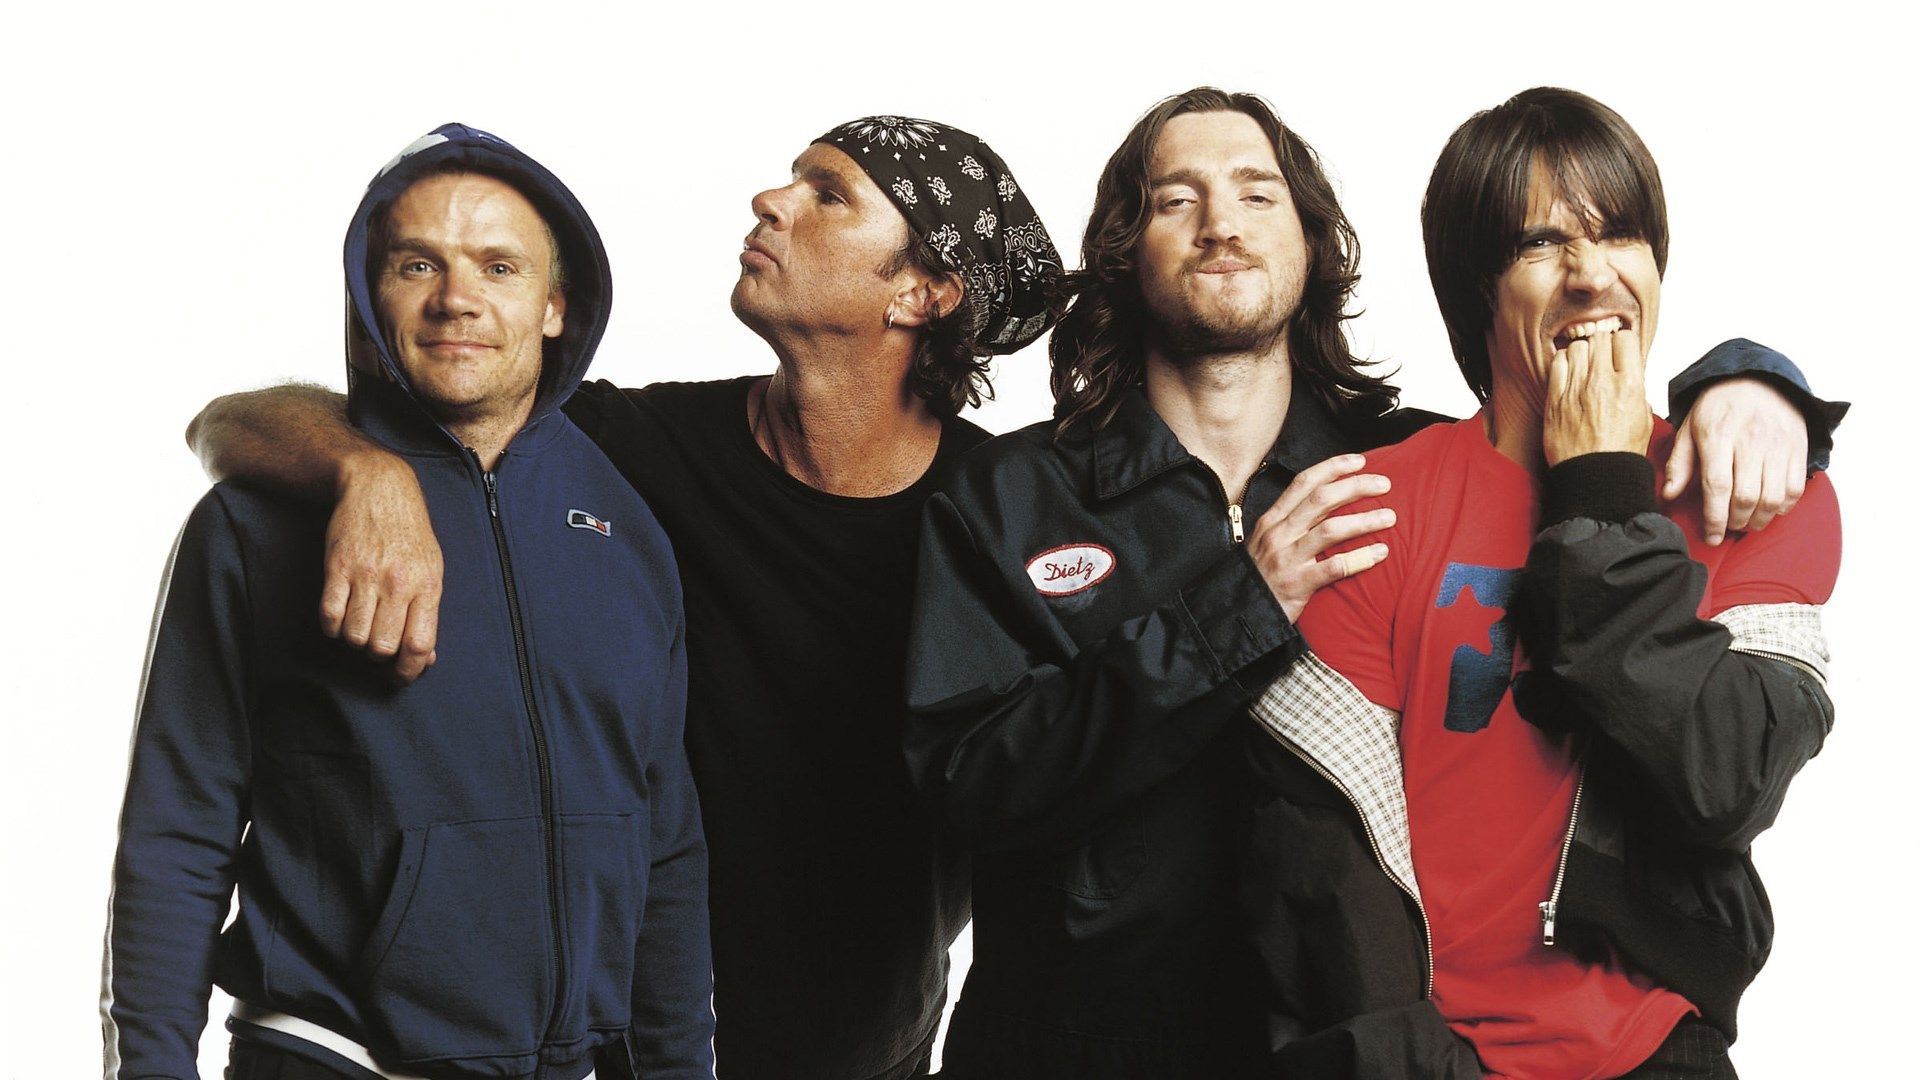 Wallpapers for desktop red hot chili peppers image red hot chili peppers hot chili hottest chili pepper